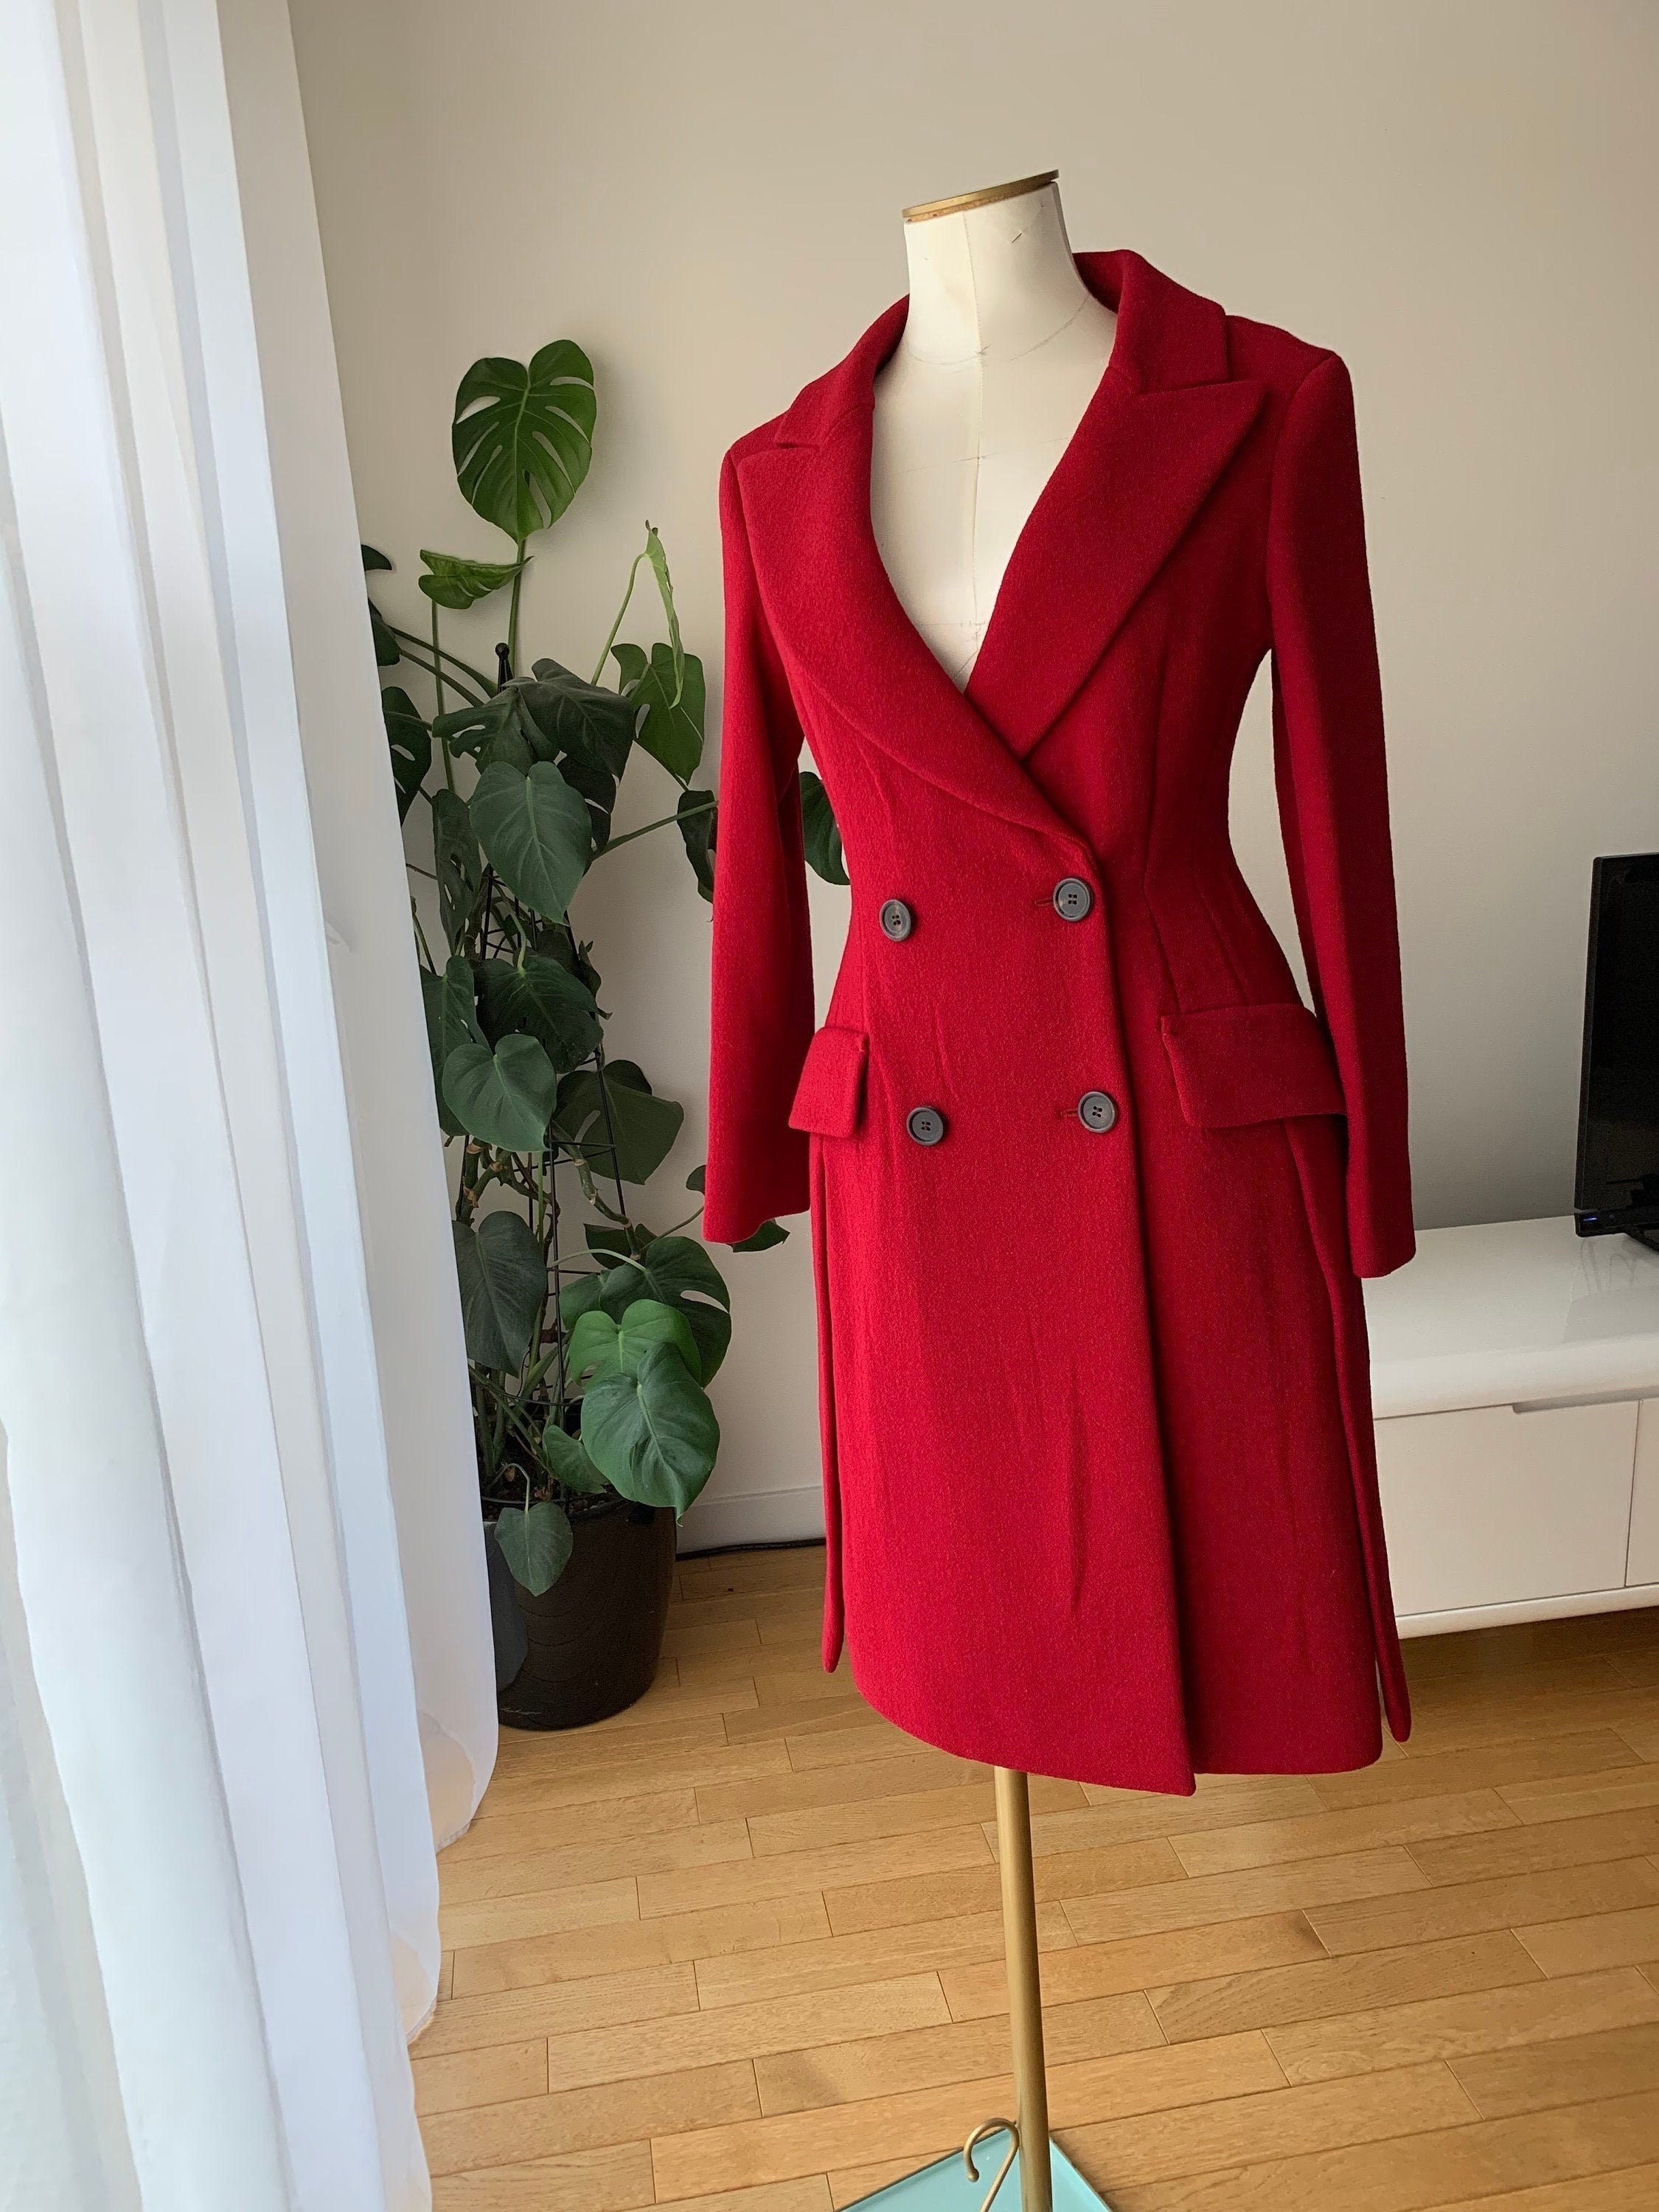 Superb PRADA wool coat a bright red Size | Etsy